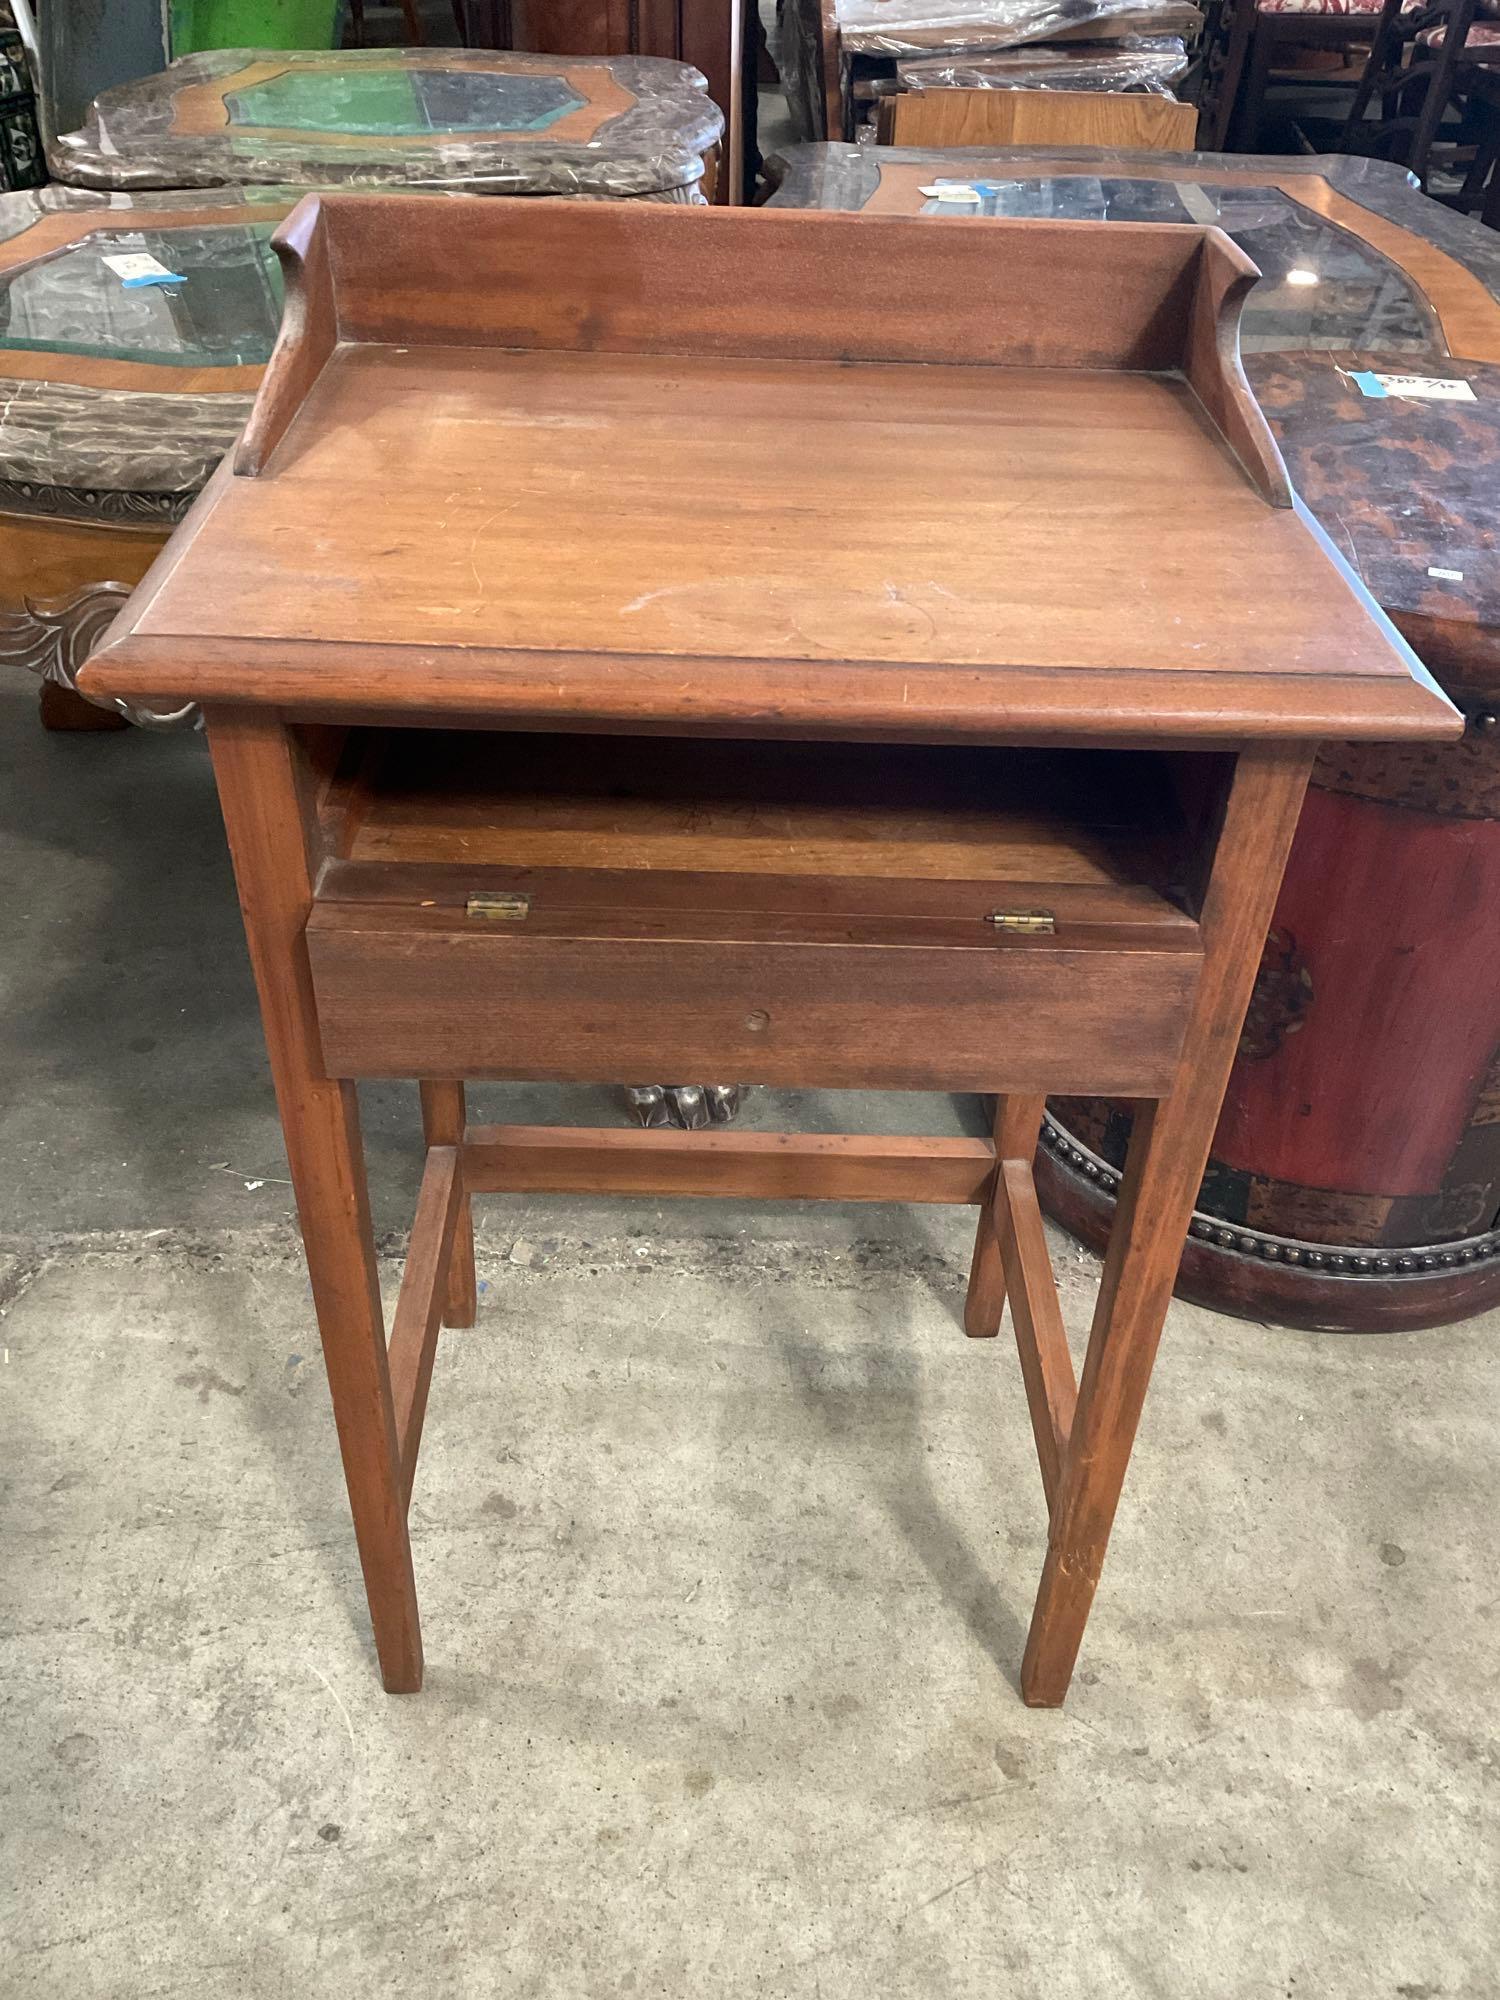 Vintage Wooden Side Table w/ Fold Open Compartment. Measures 20.5" x 23" See pics.